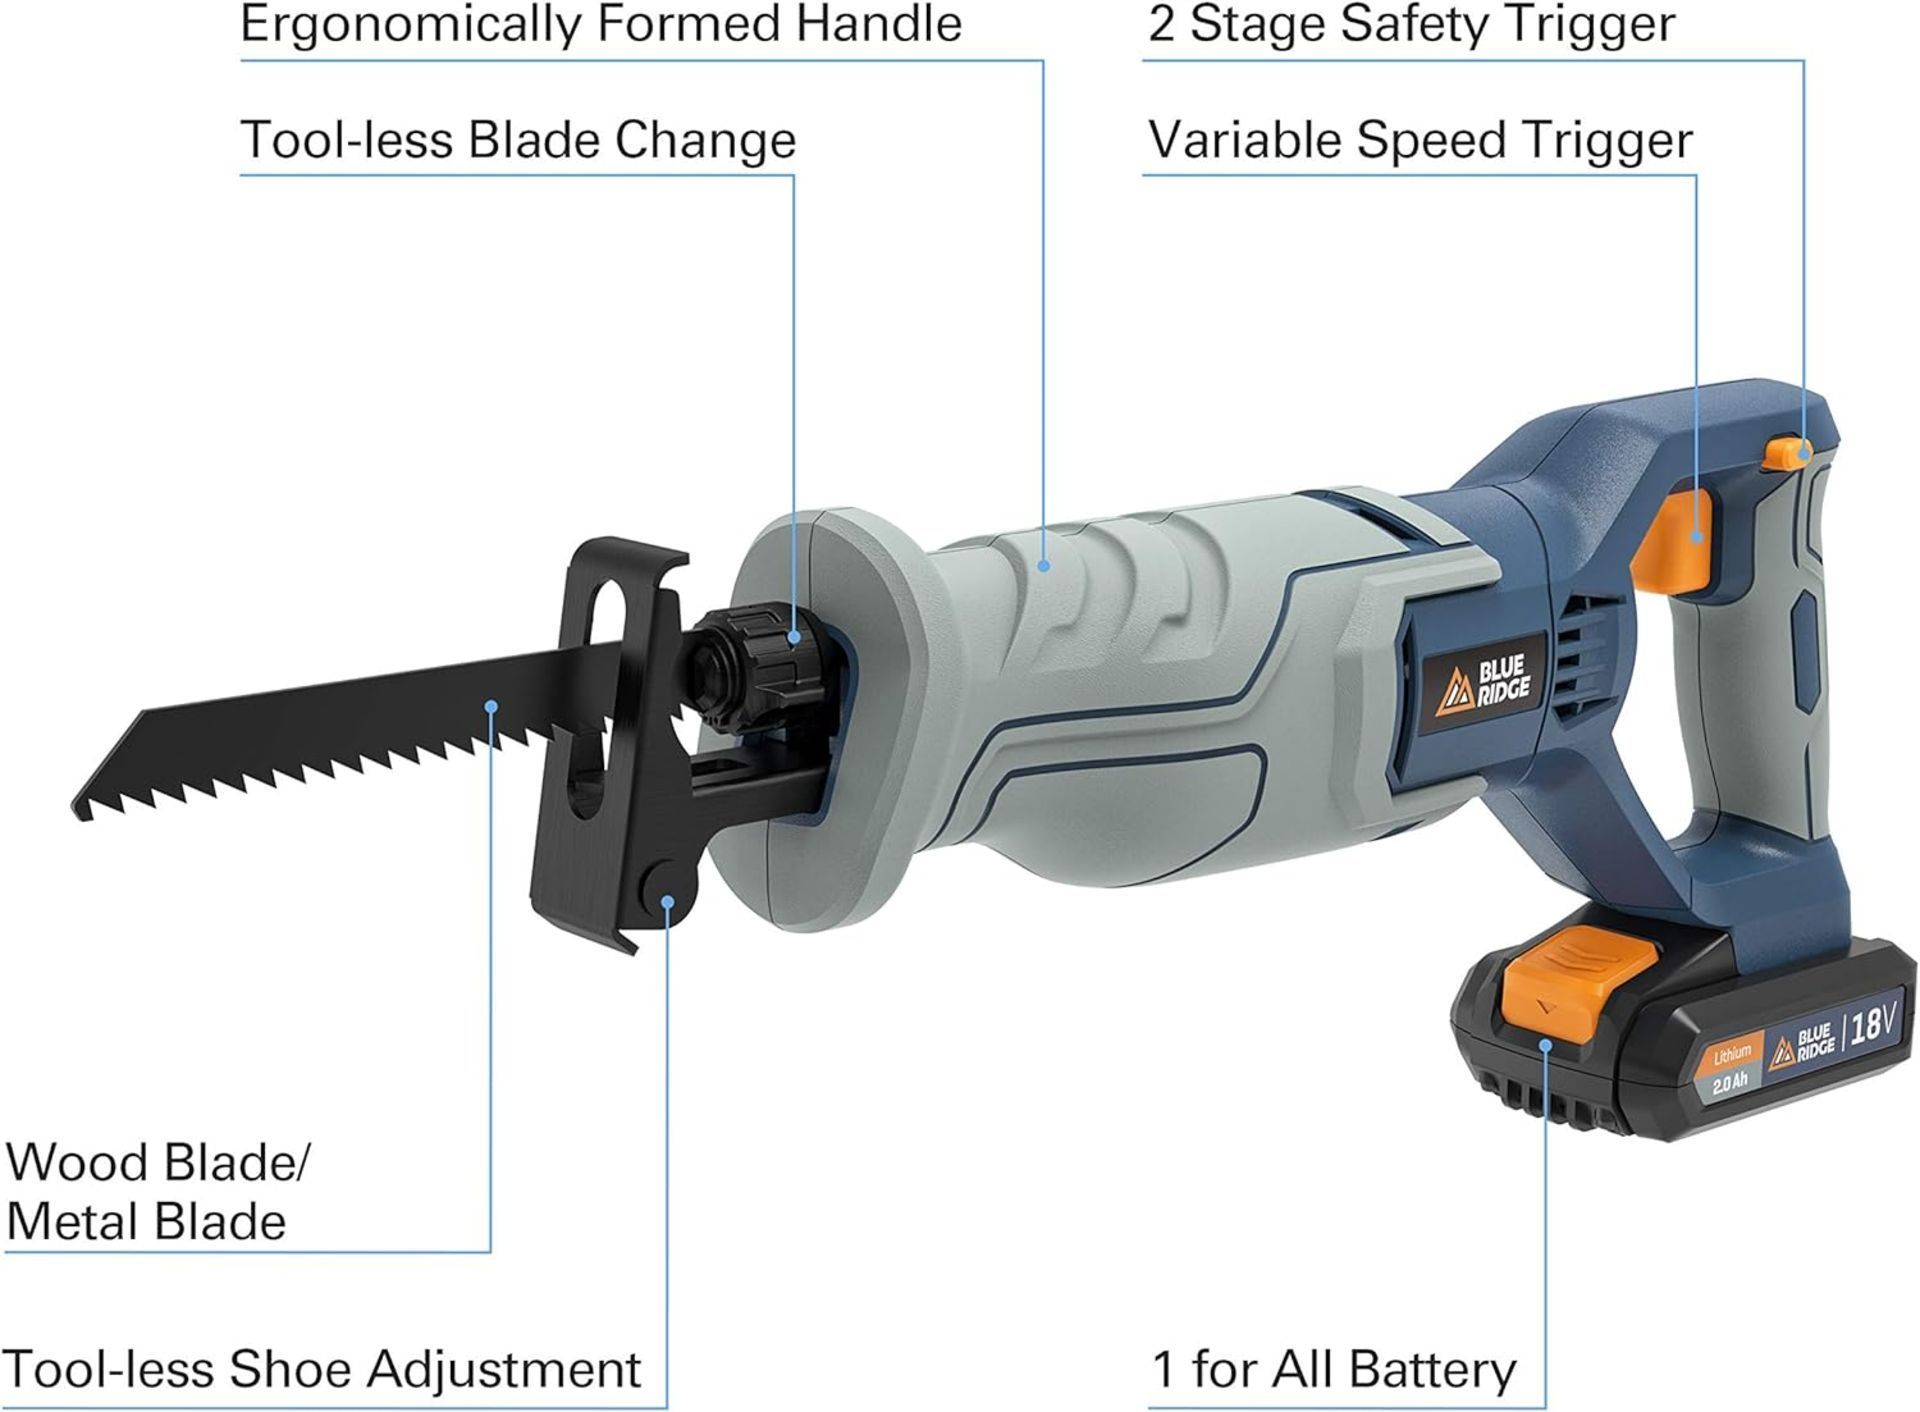 3x NEW & BOXED BLUE RIDGE 18V Reciprocating Cordless Sabre Saw with 2.0Ah Battery. RRP £99 EACH. - Image 5 of 6